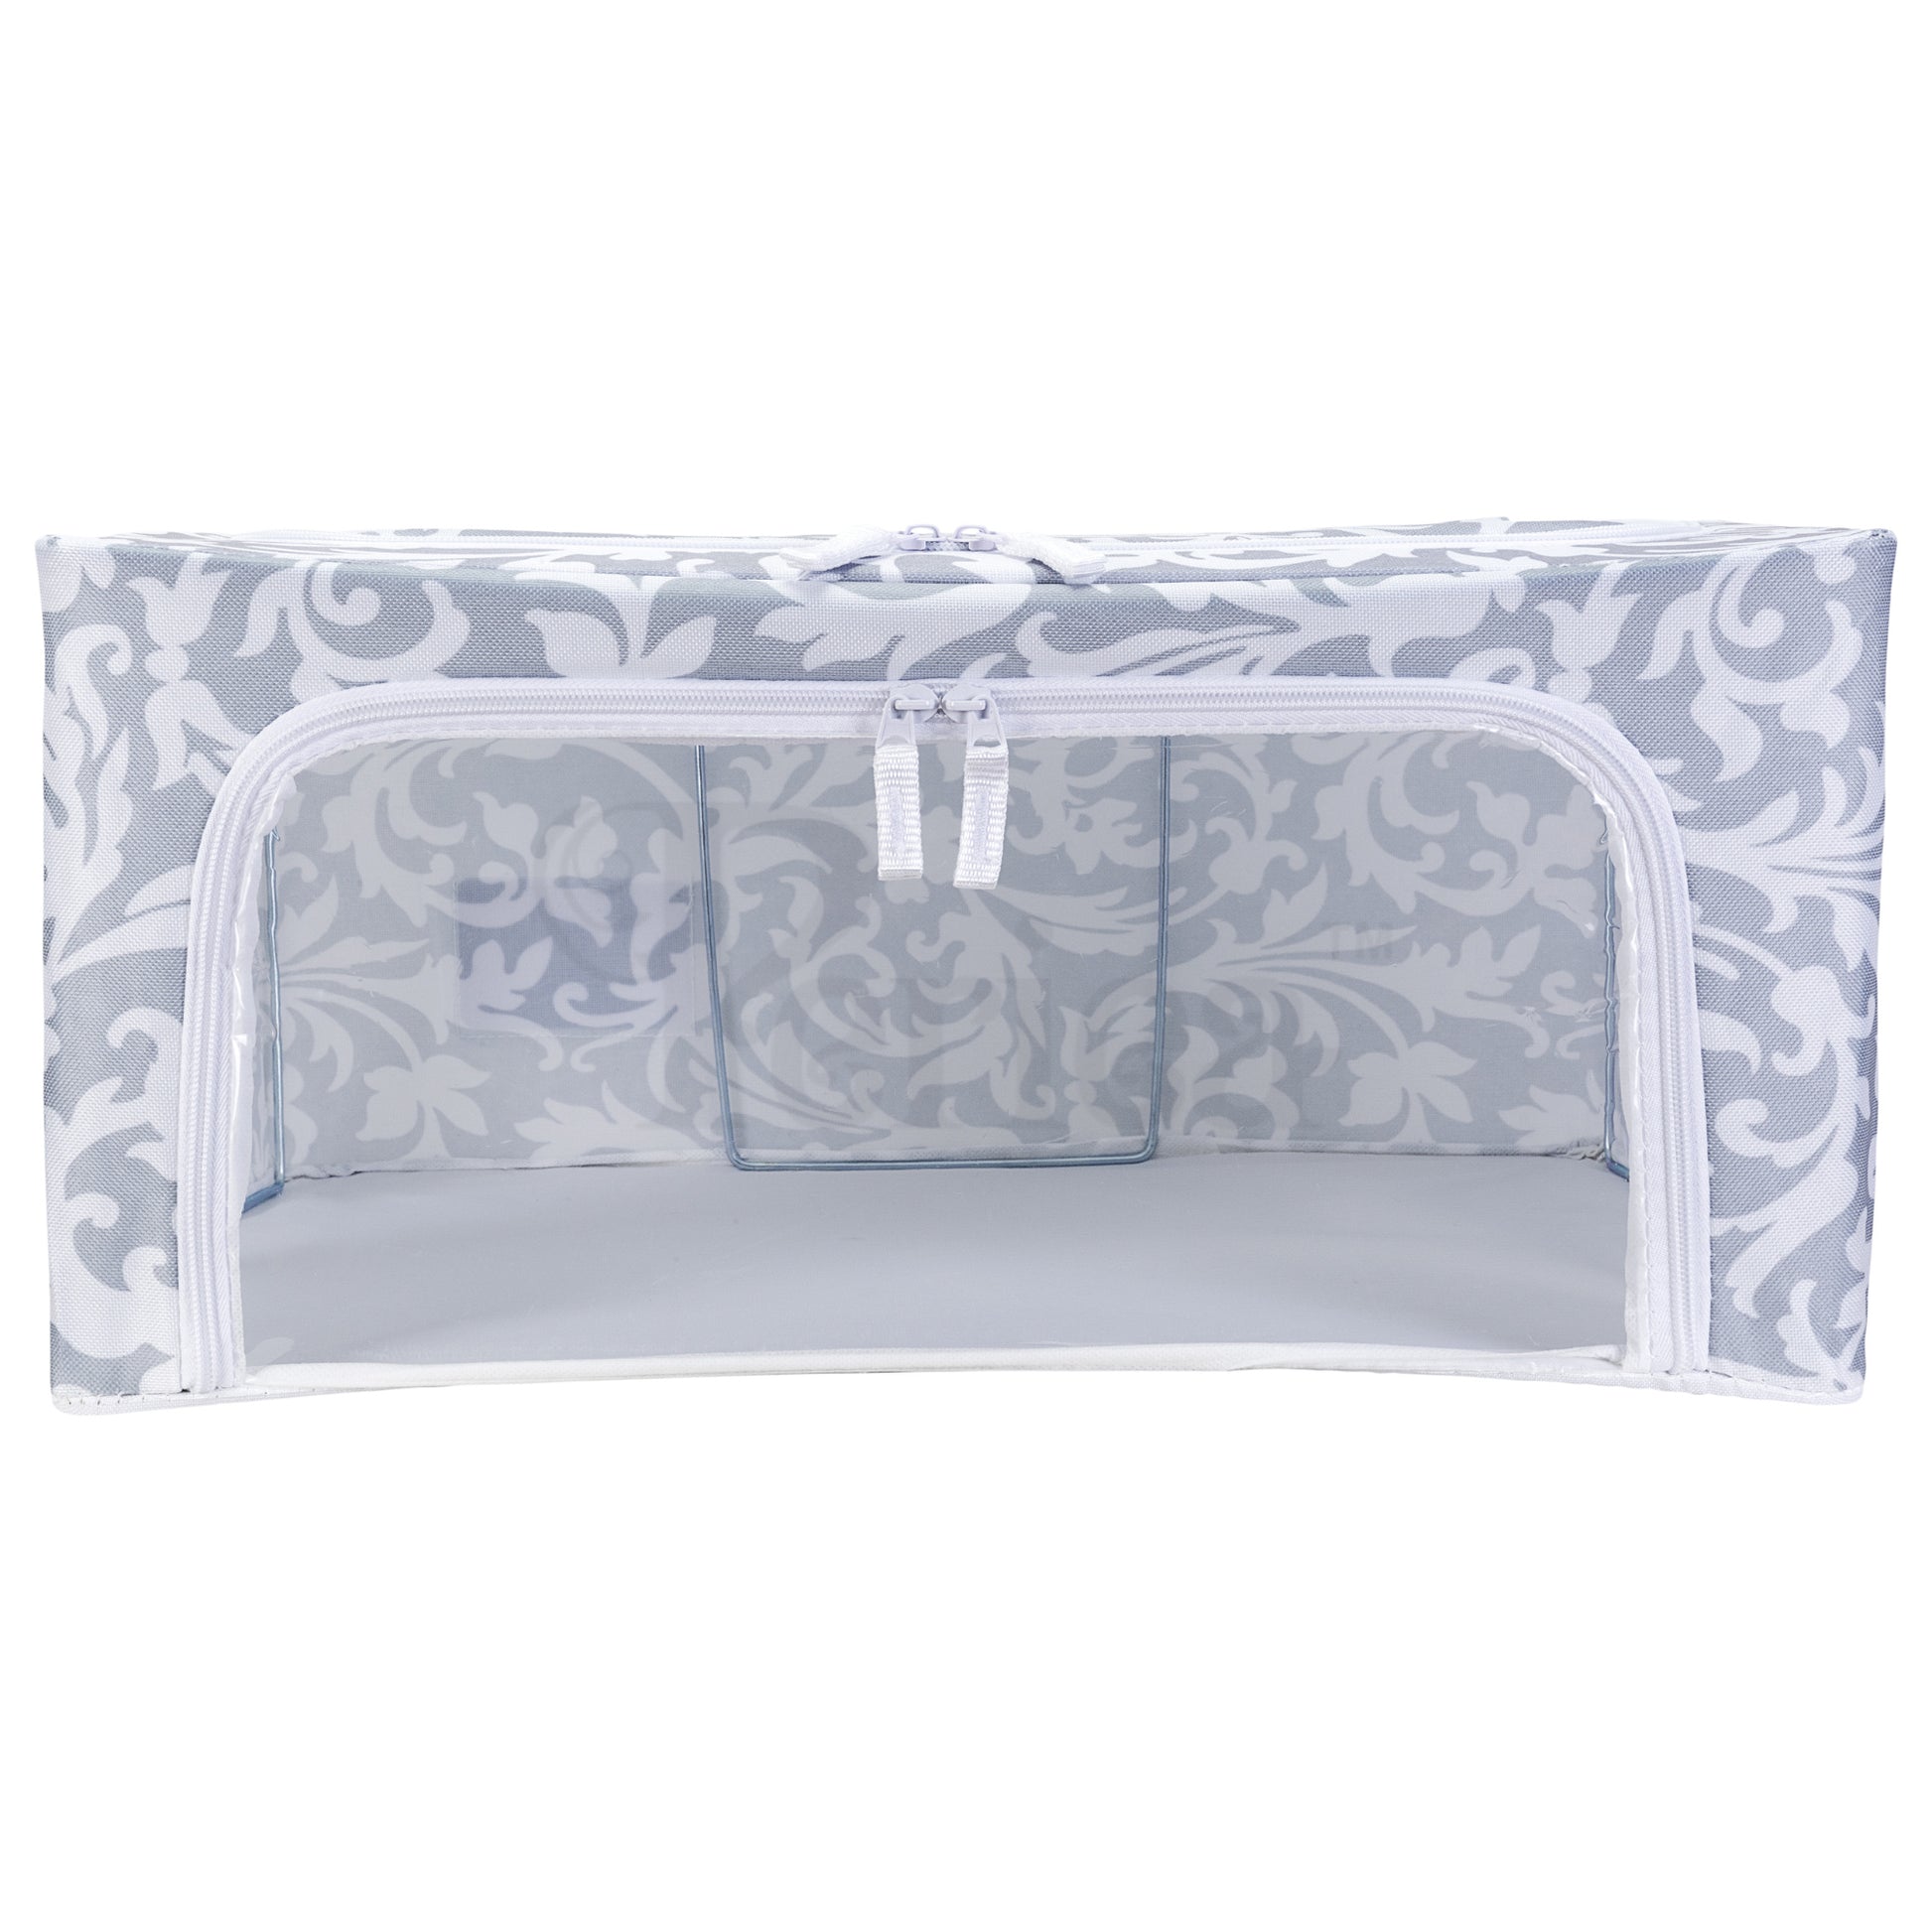 Periea Folding/Collapsible Storage Box - Grey Damask - Holiday Accent Ltd